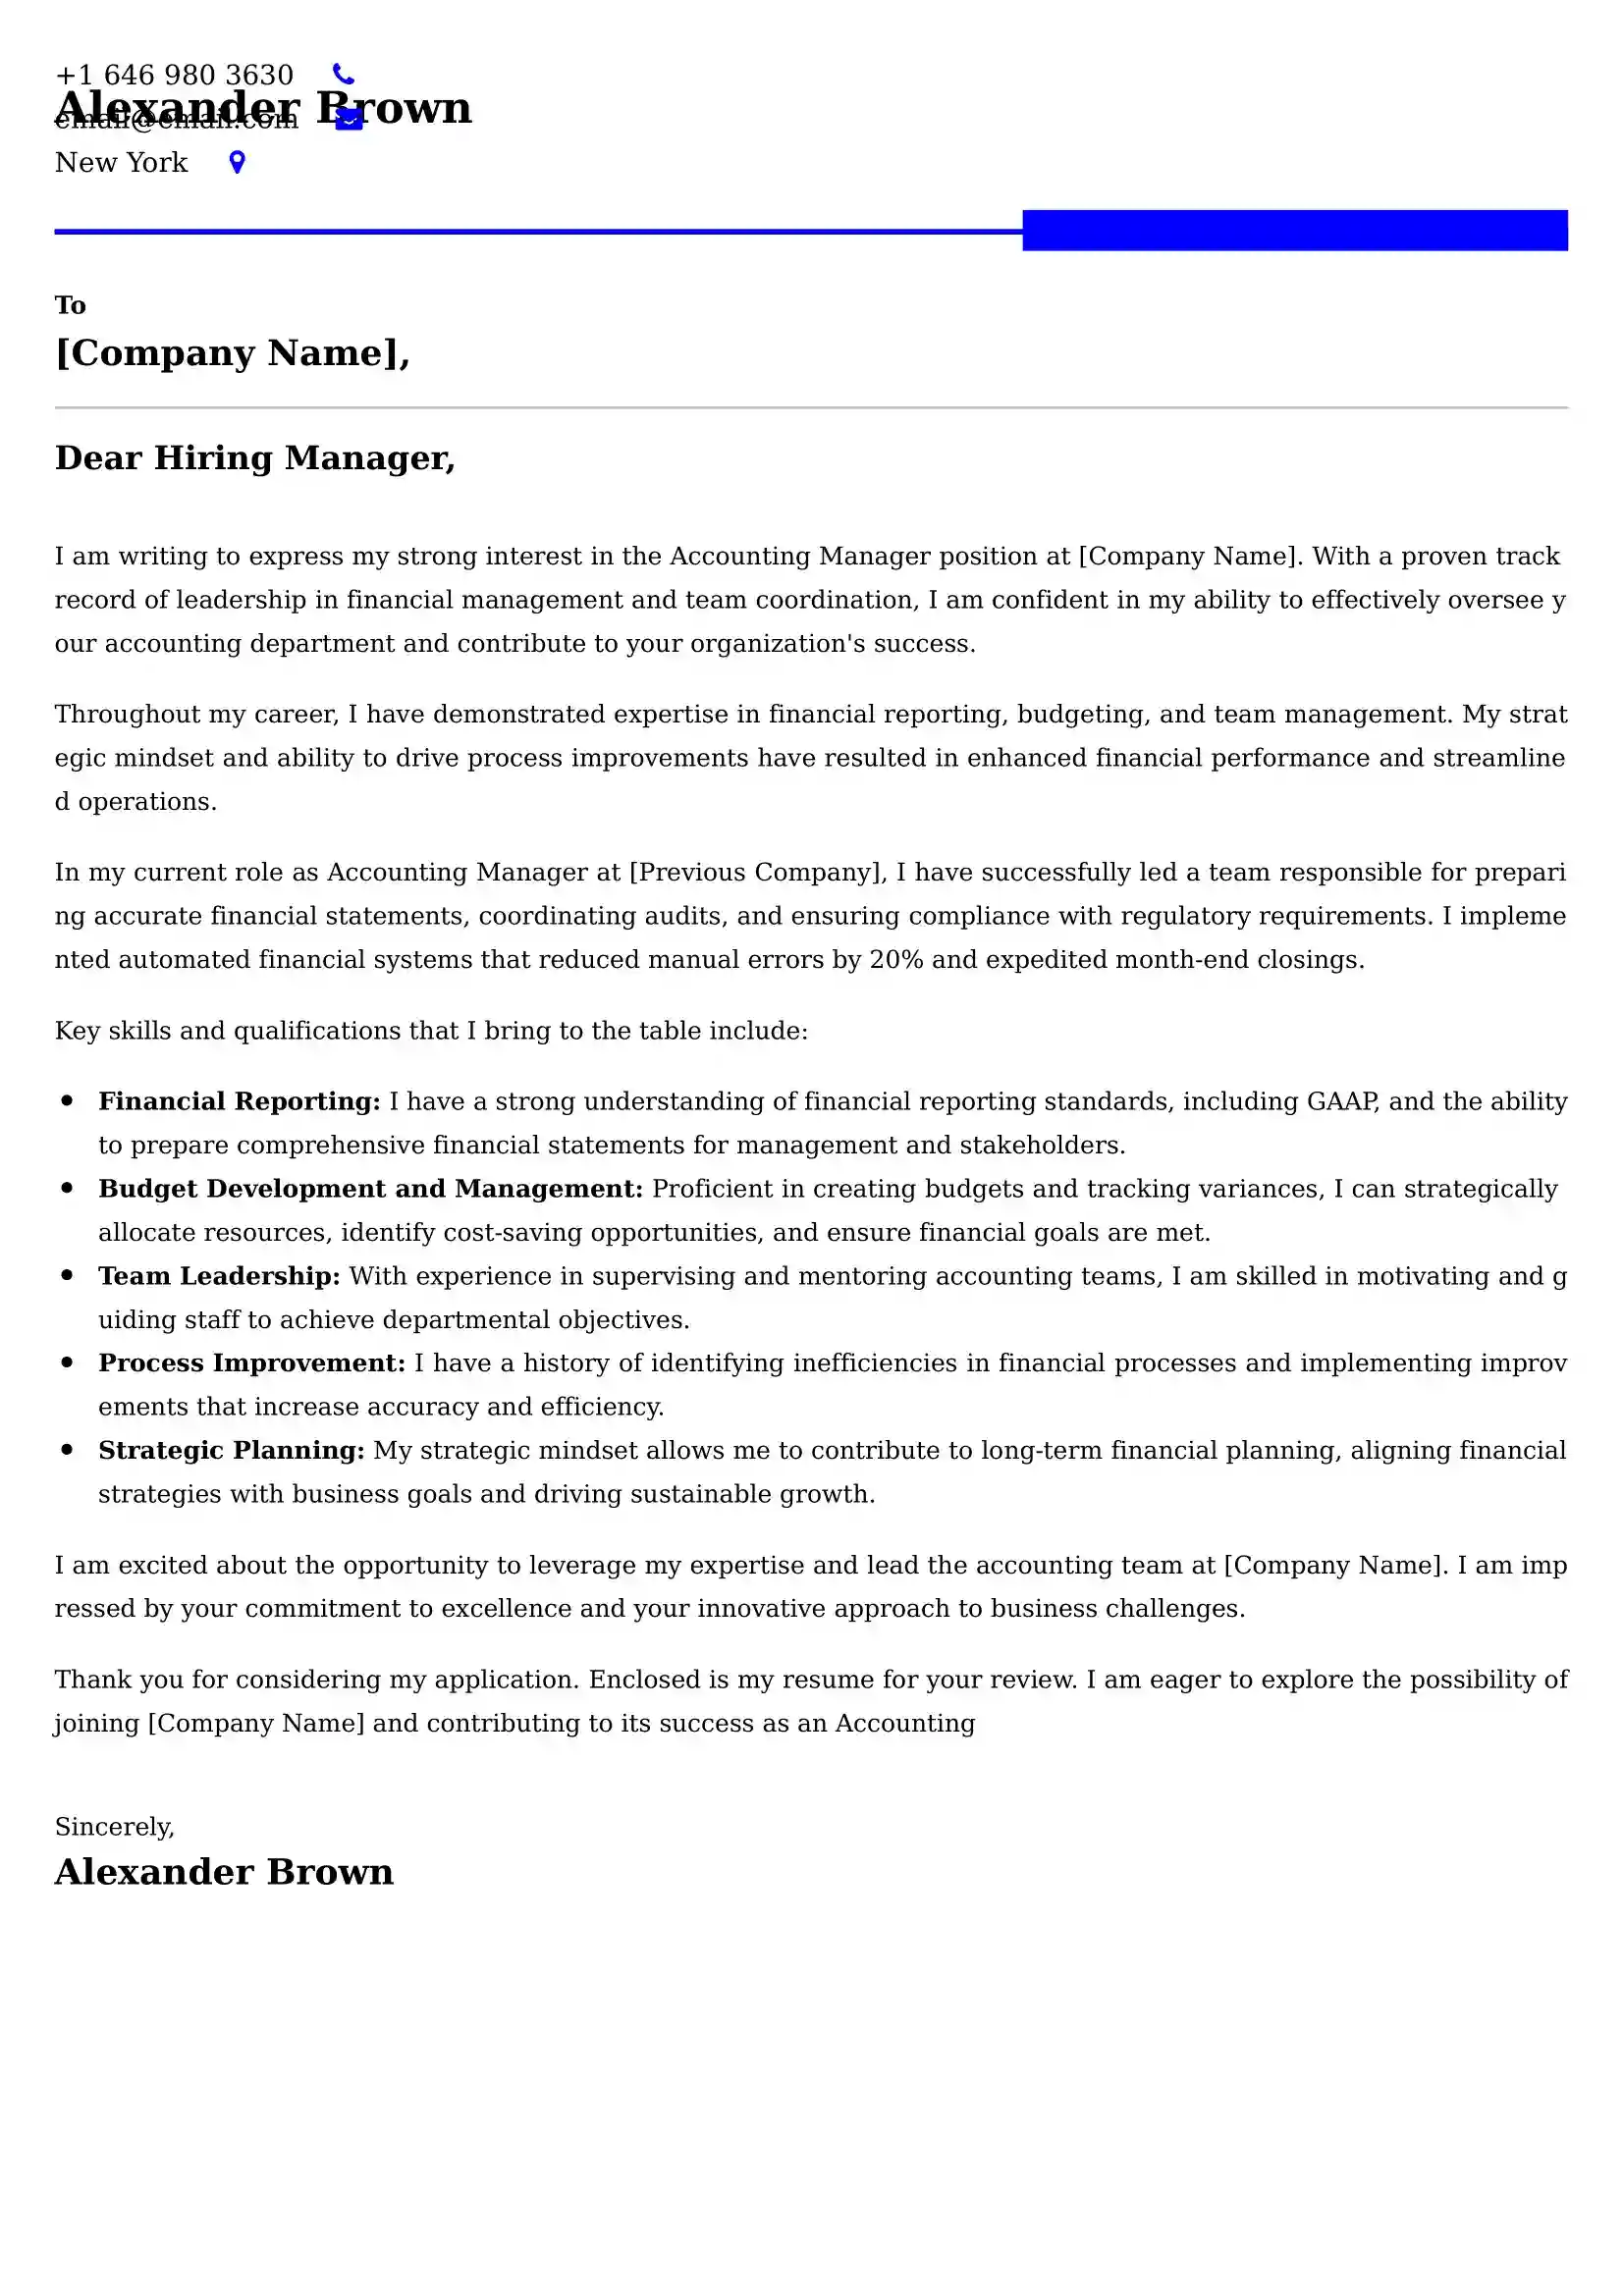 Accounting Manager Cover Letter Samples Malaysia